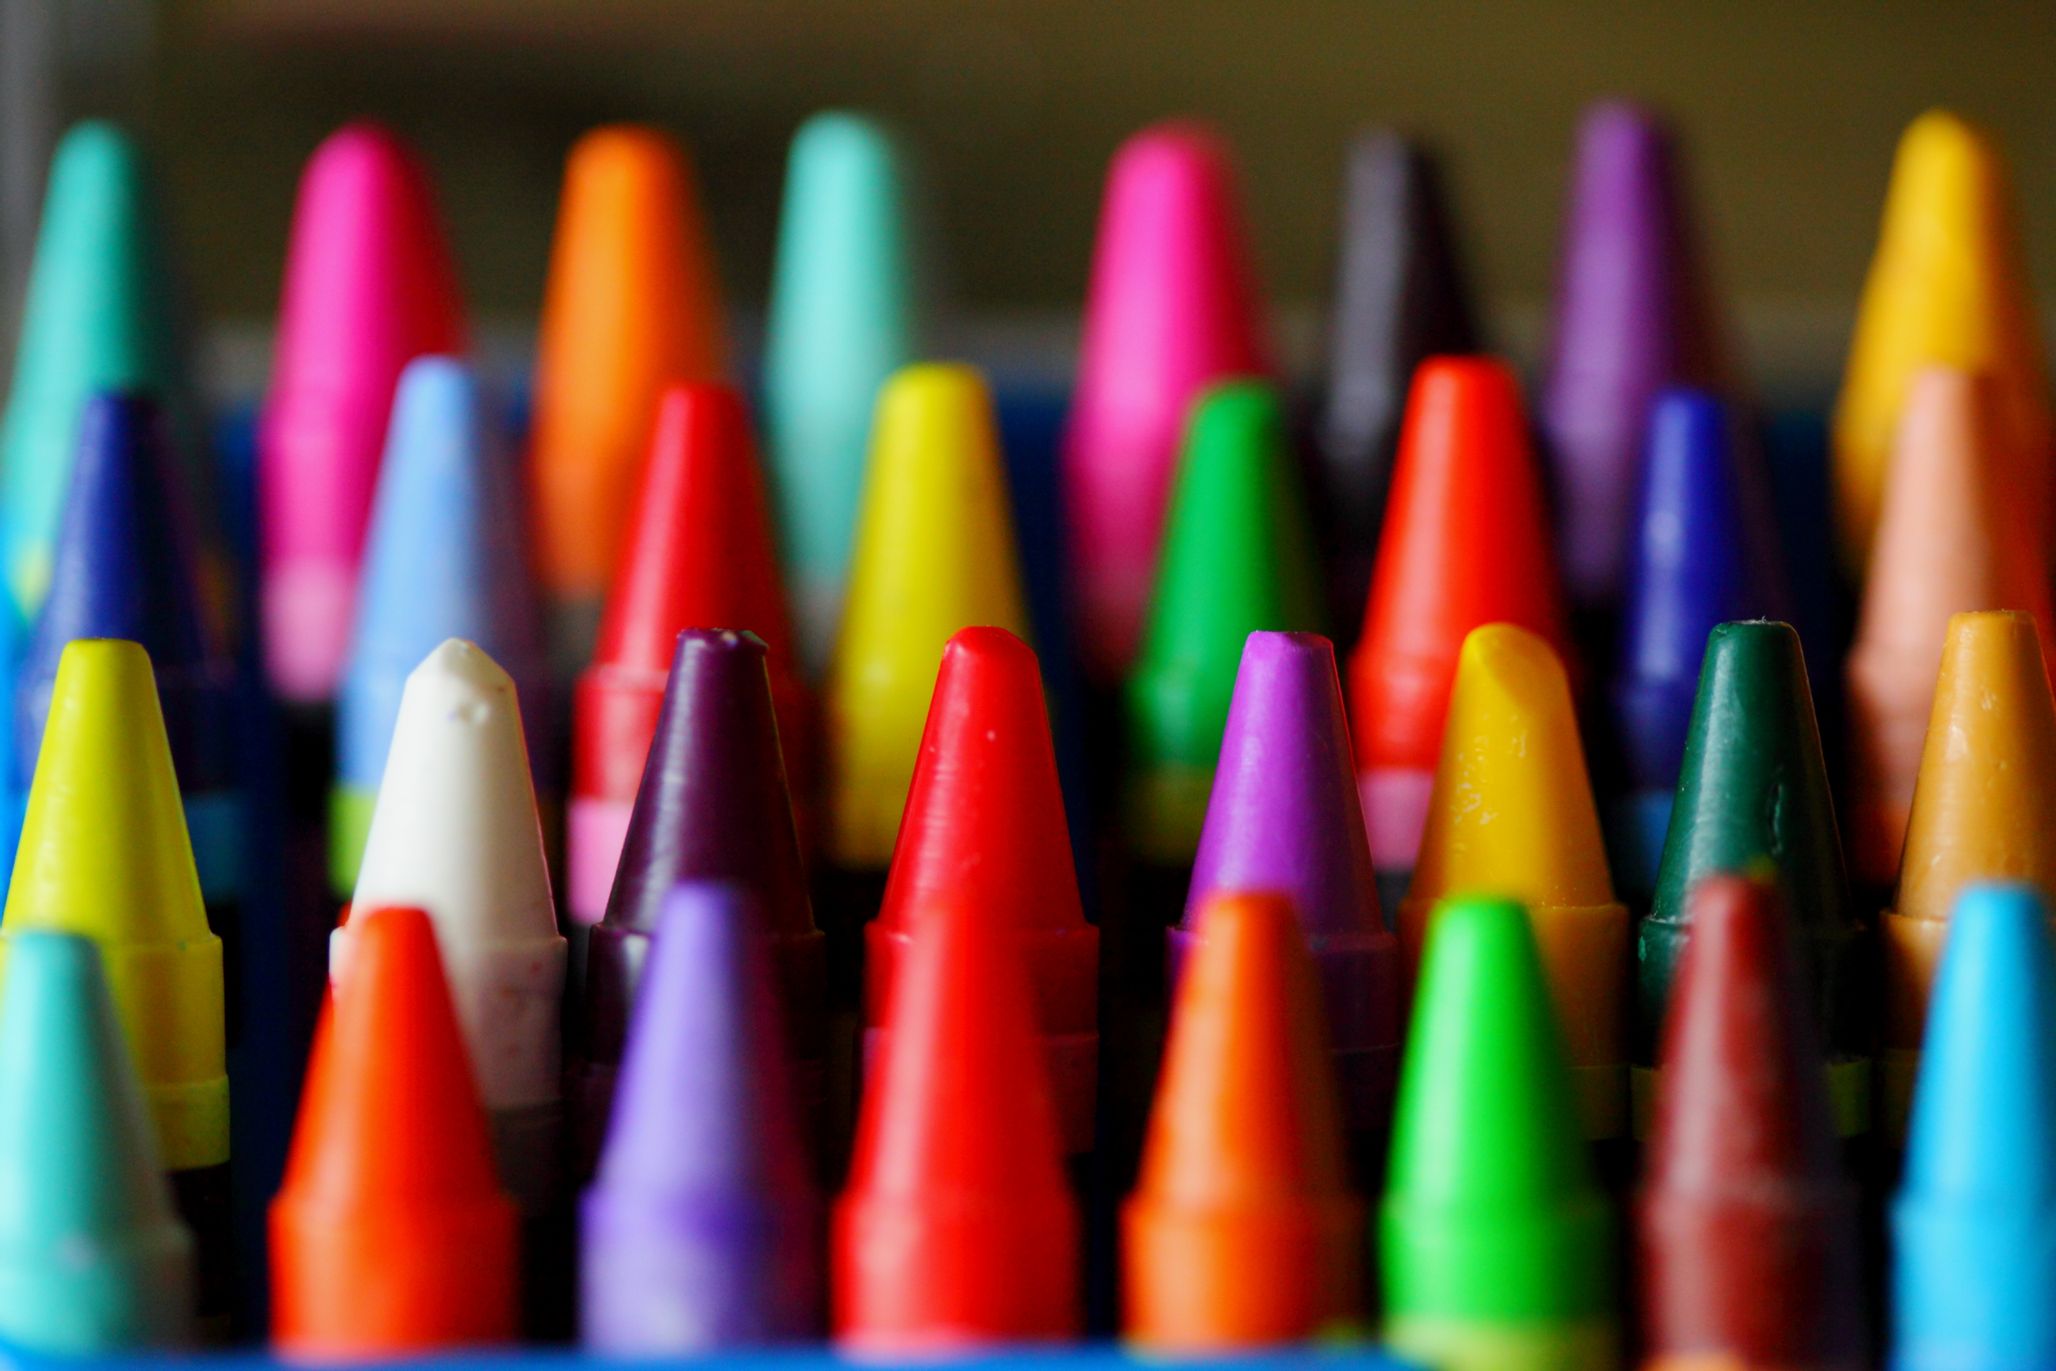 Managing People, Like a Box of Crayons